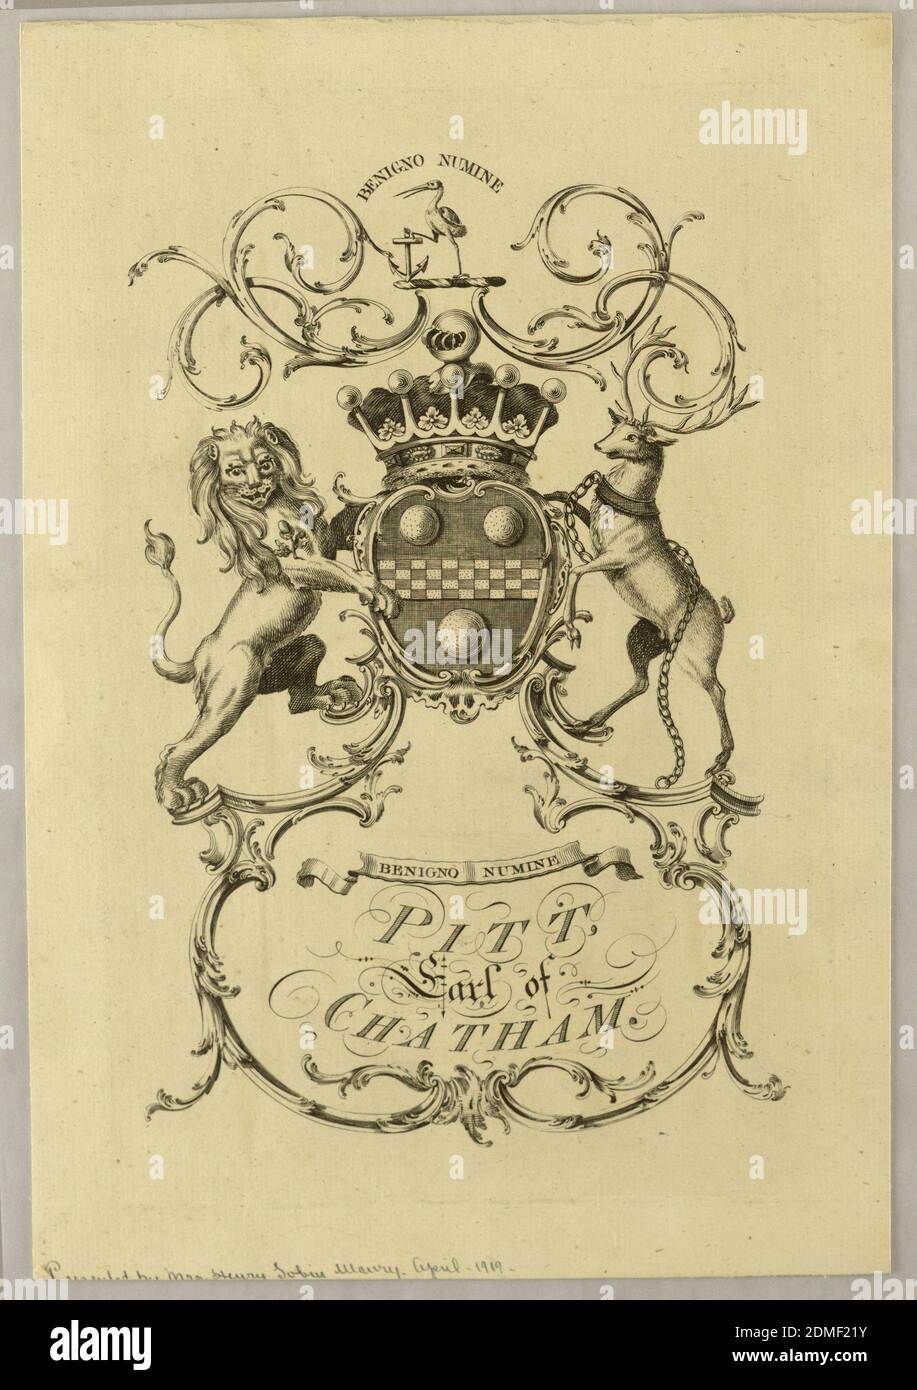 Pitt, Earl of Chatham, Coat of Arms, England, 1736, Print Stock Photo